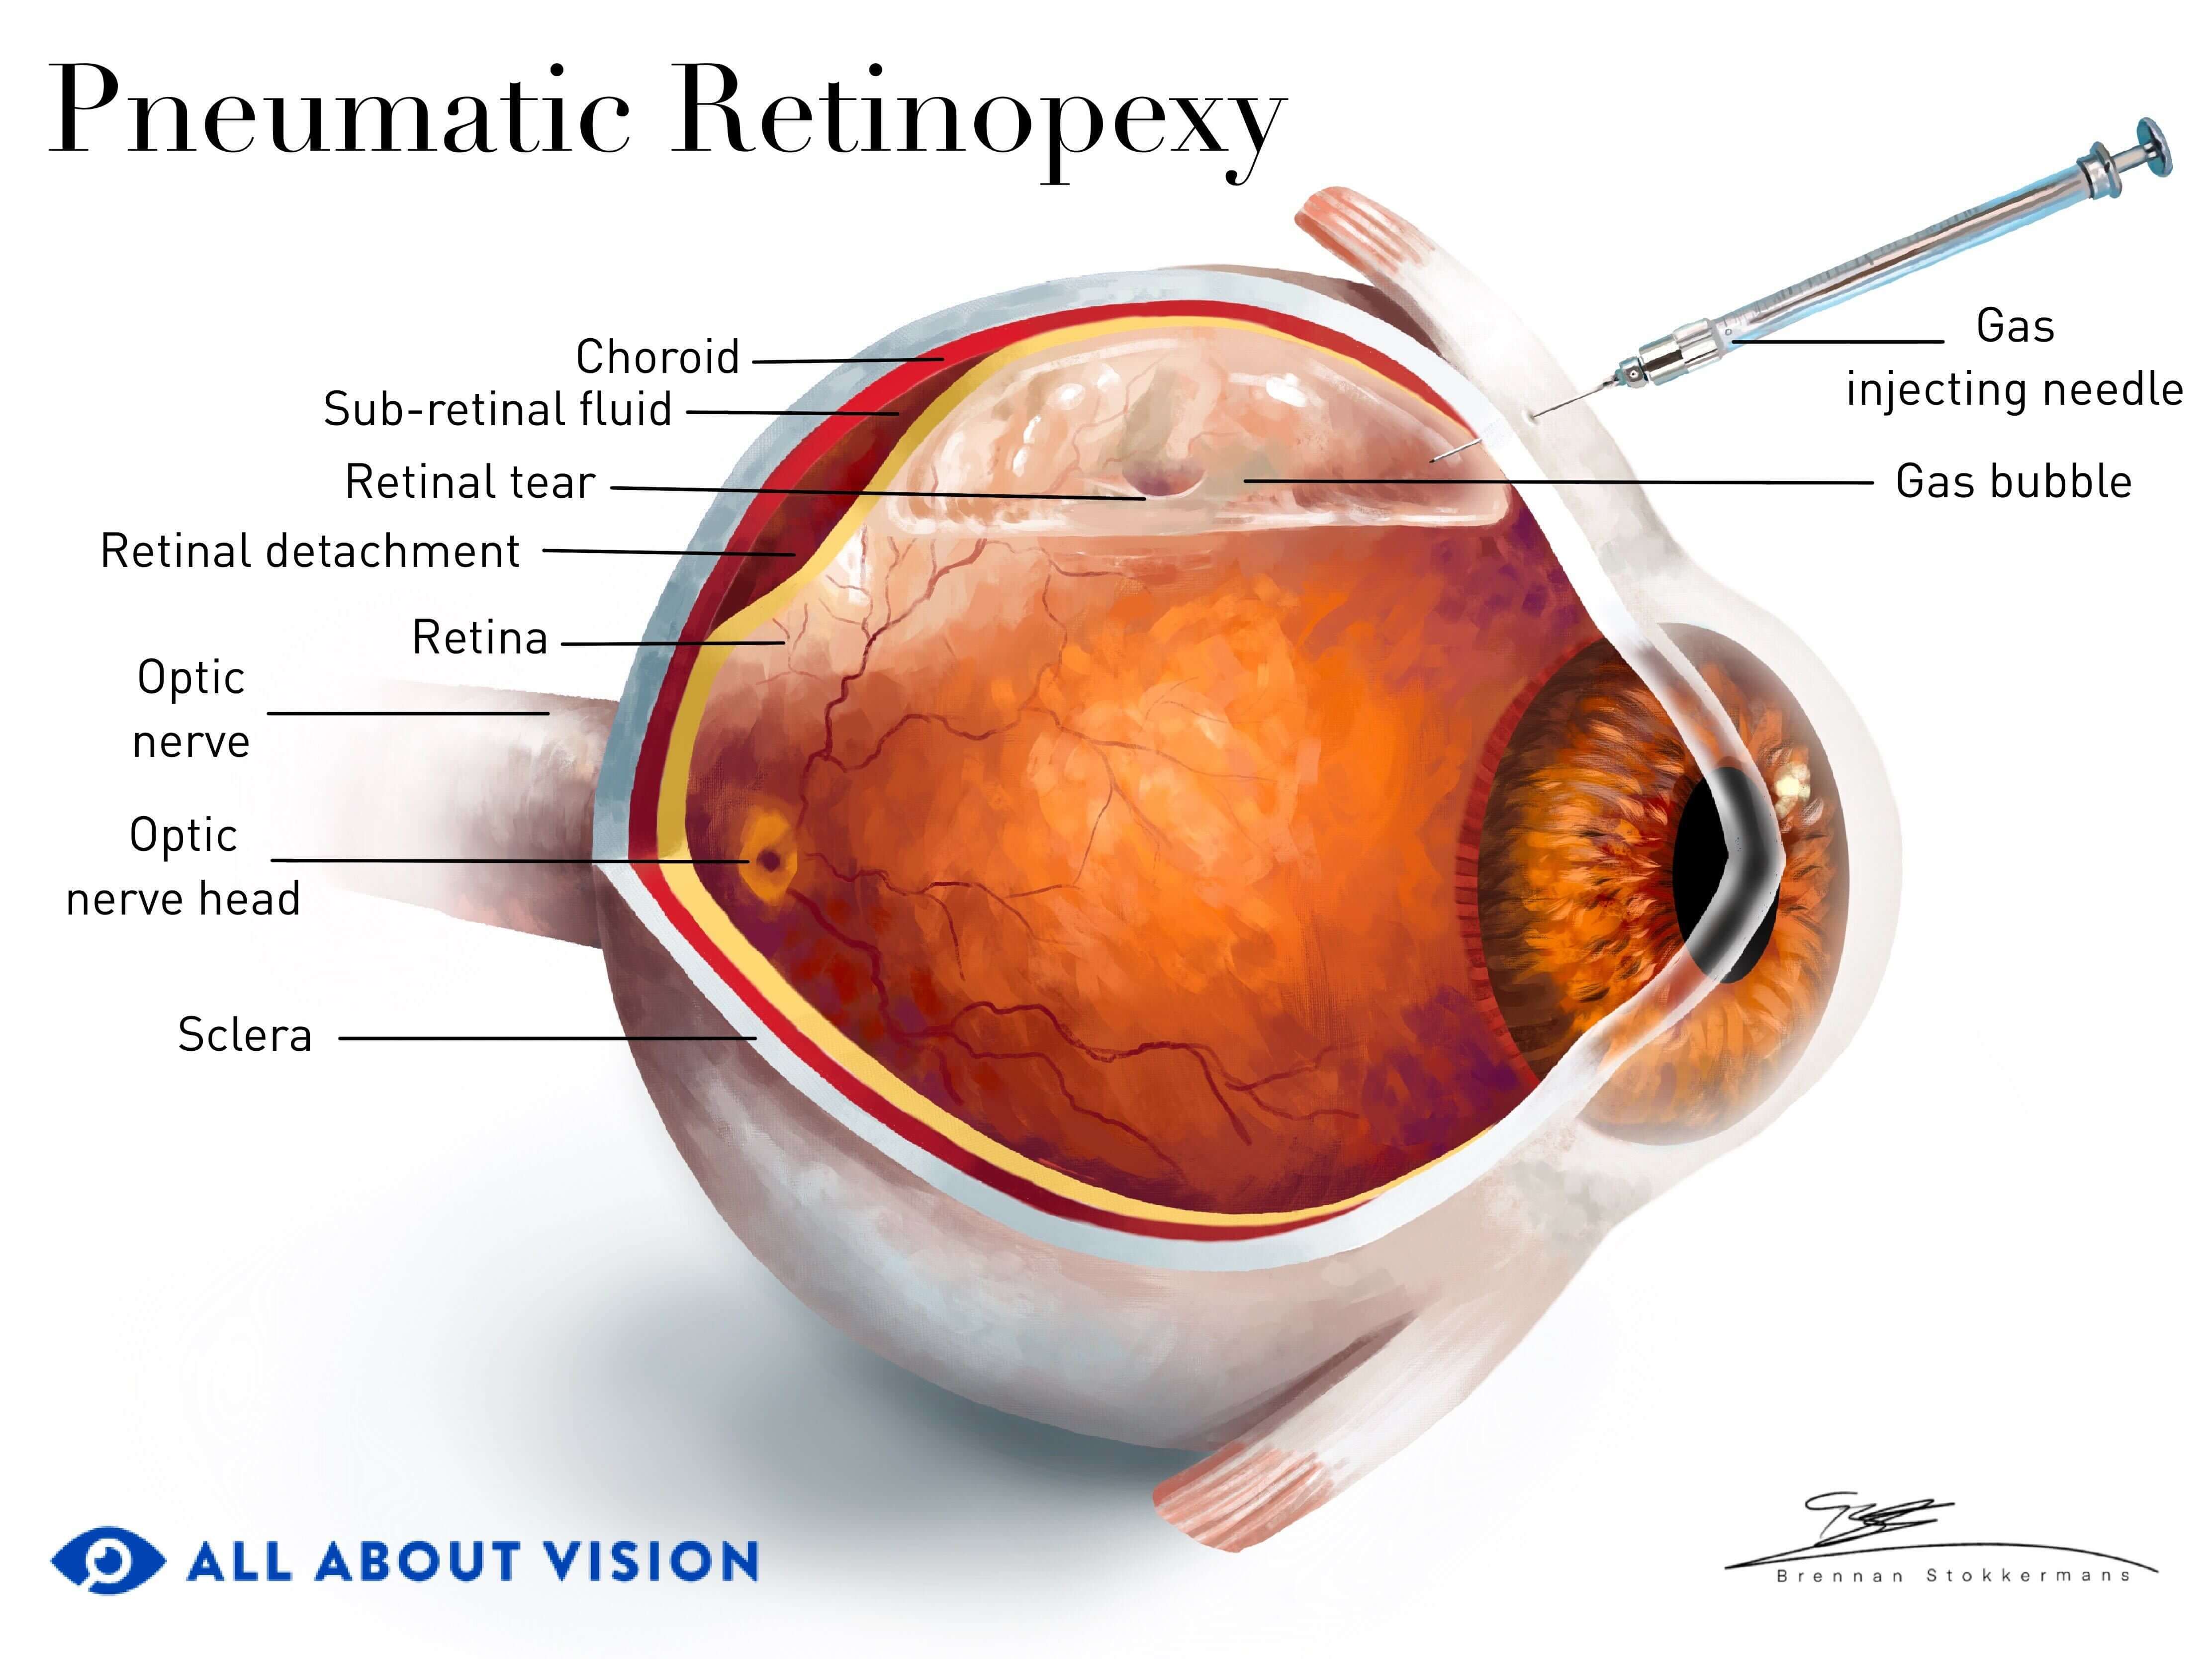 Image showcasing the anatomy of the eye, and what a detached retina looks like before pneumatic retinopexy surgery.